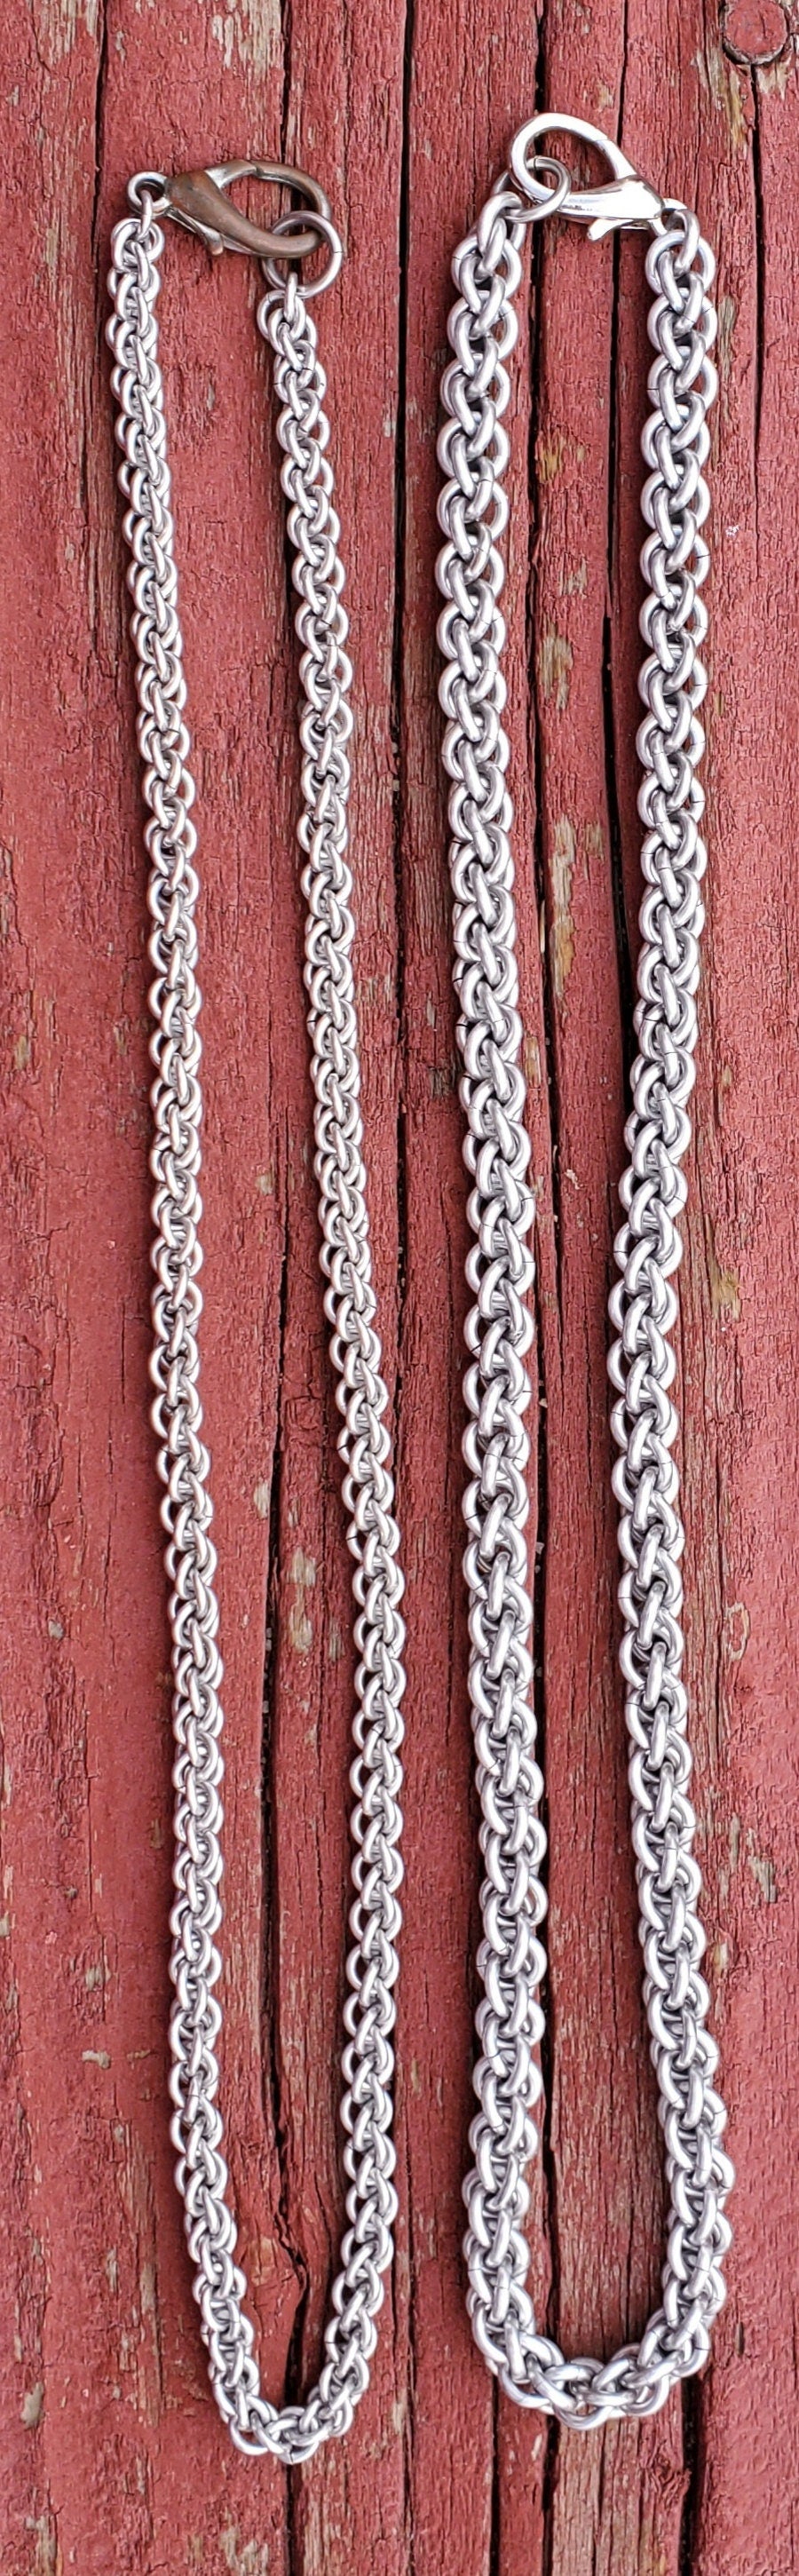 JPL3 Necklace Chain, Handmade Chainmaille necklace, Pendant perfect